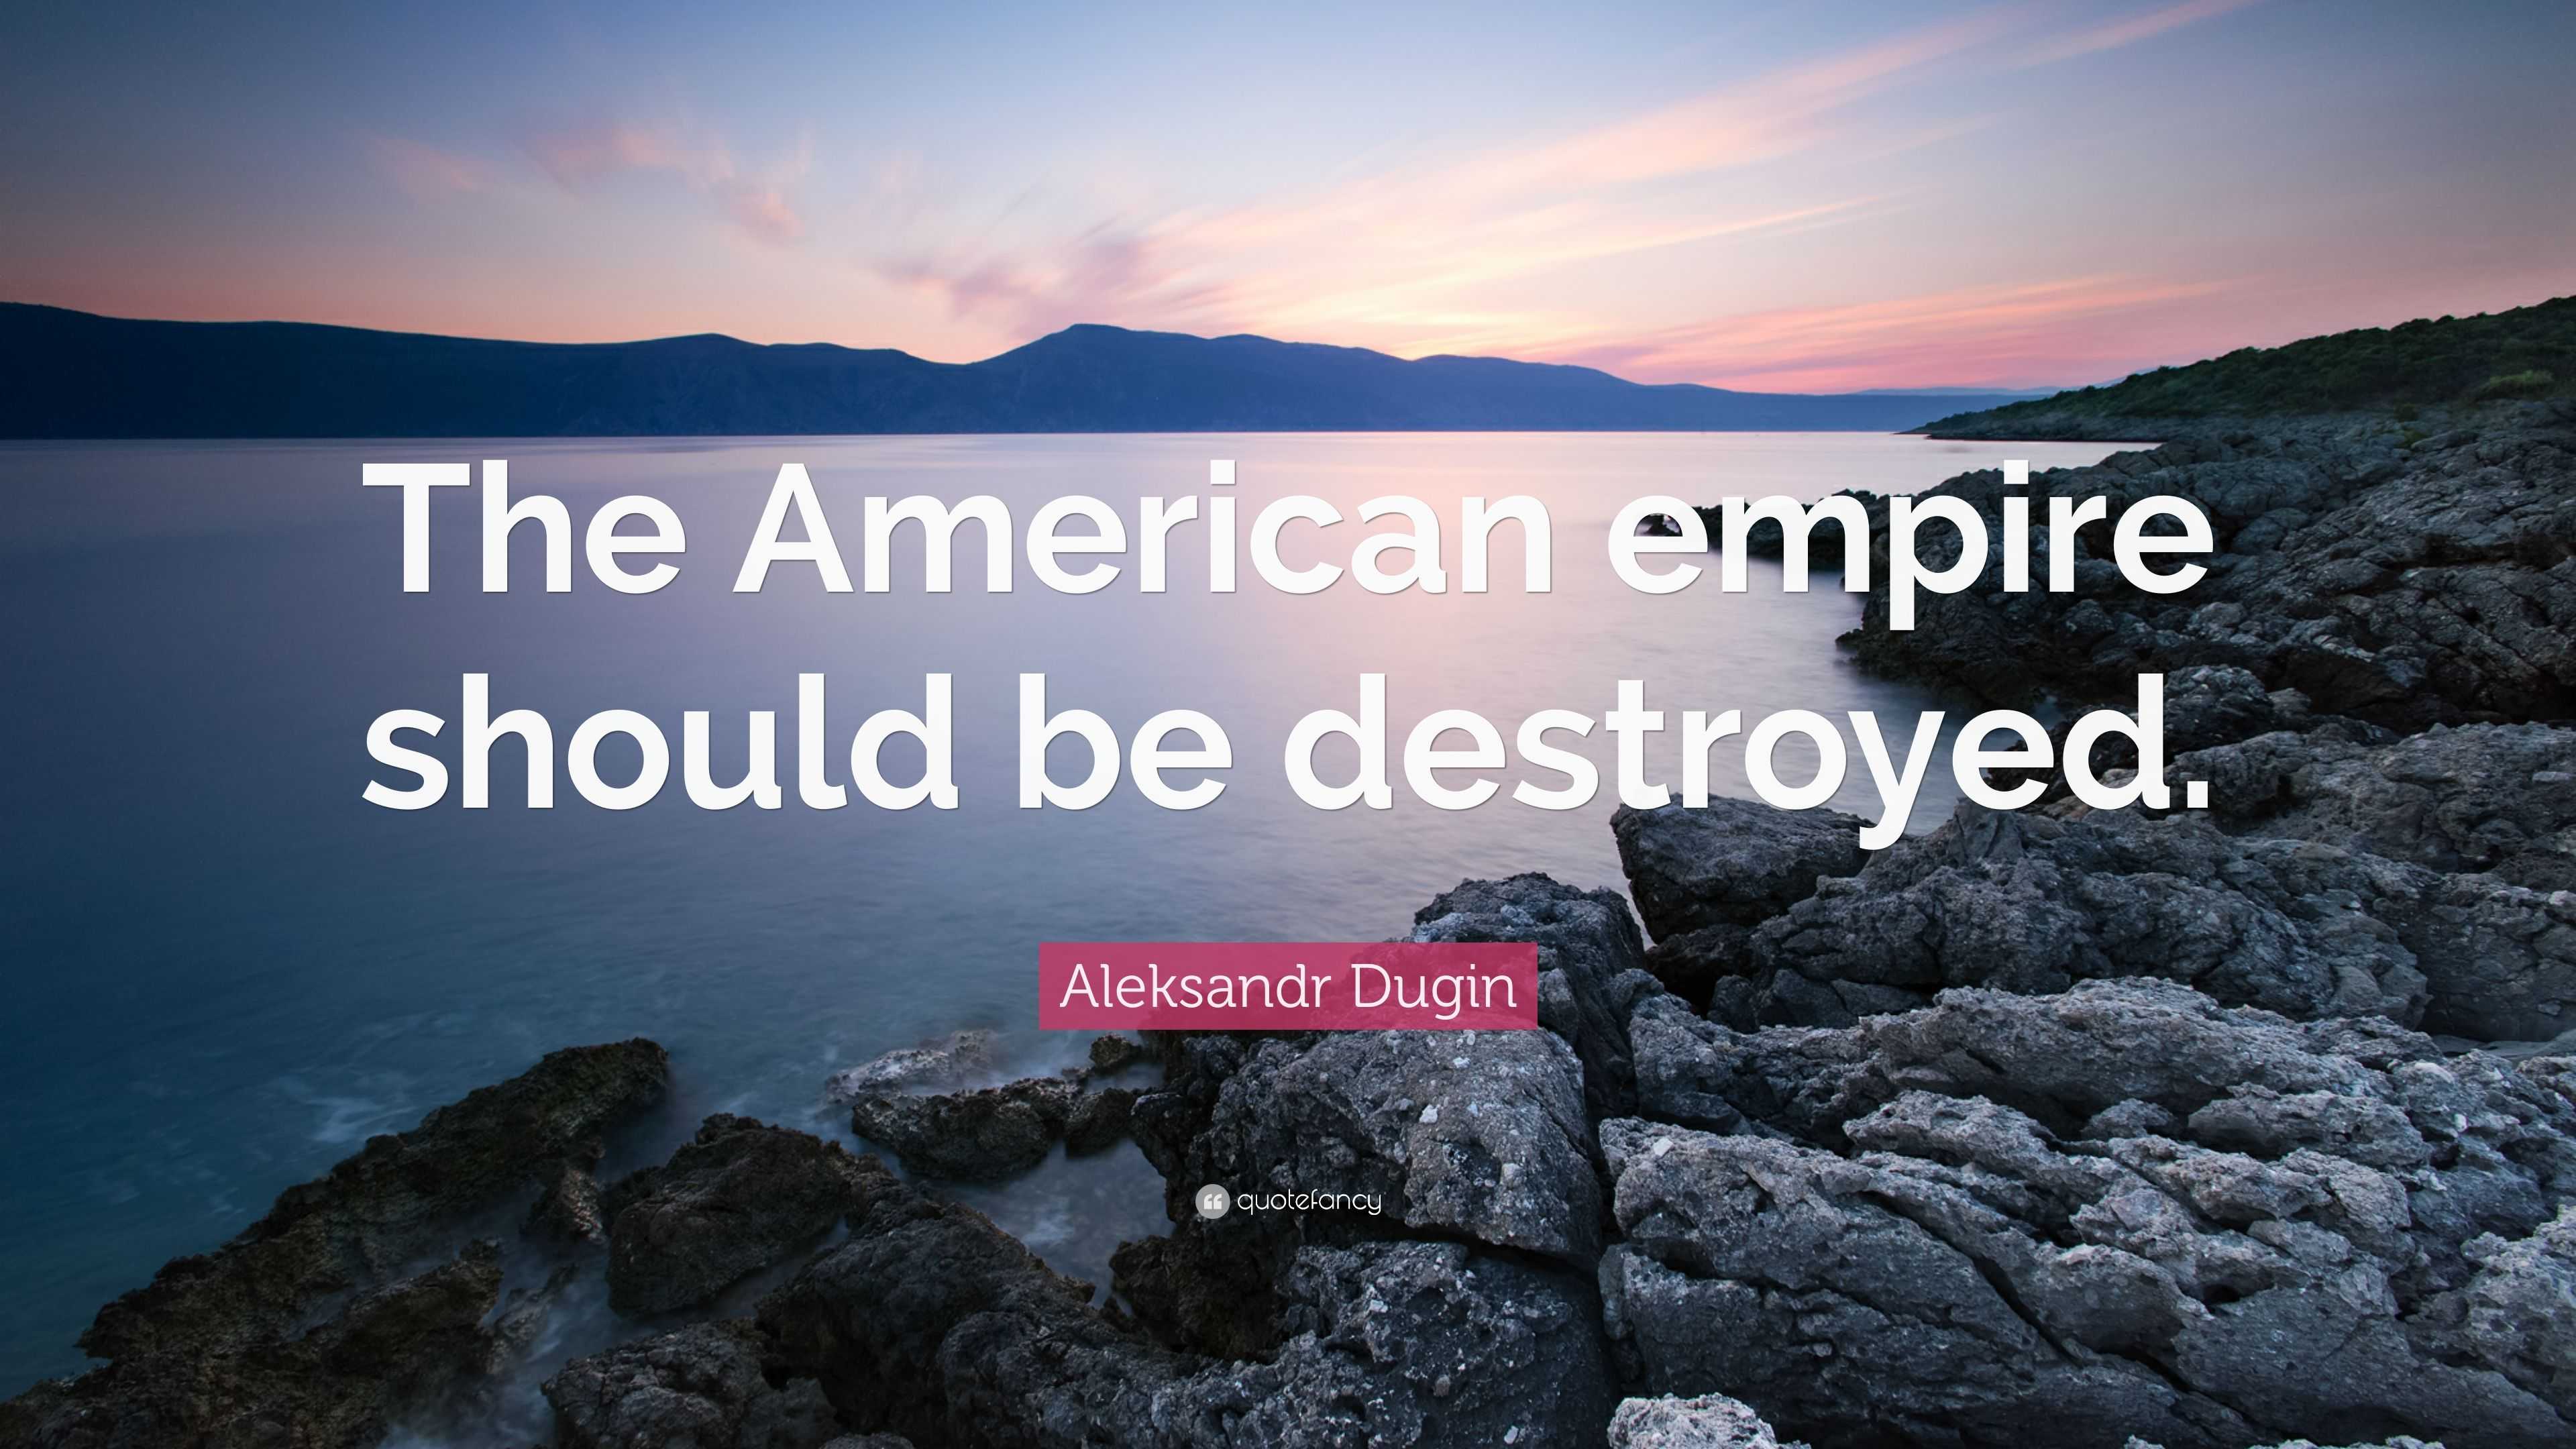 Aleksandr Dugin Quote “the American Empire Should Be Destroyed”